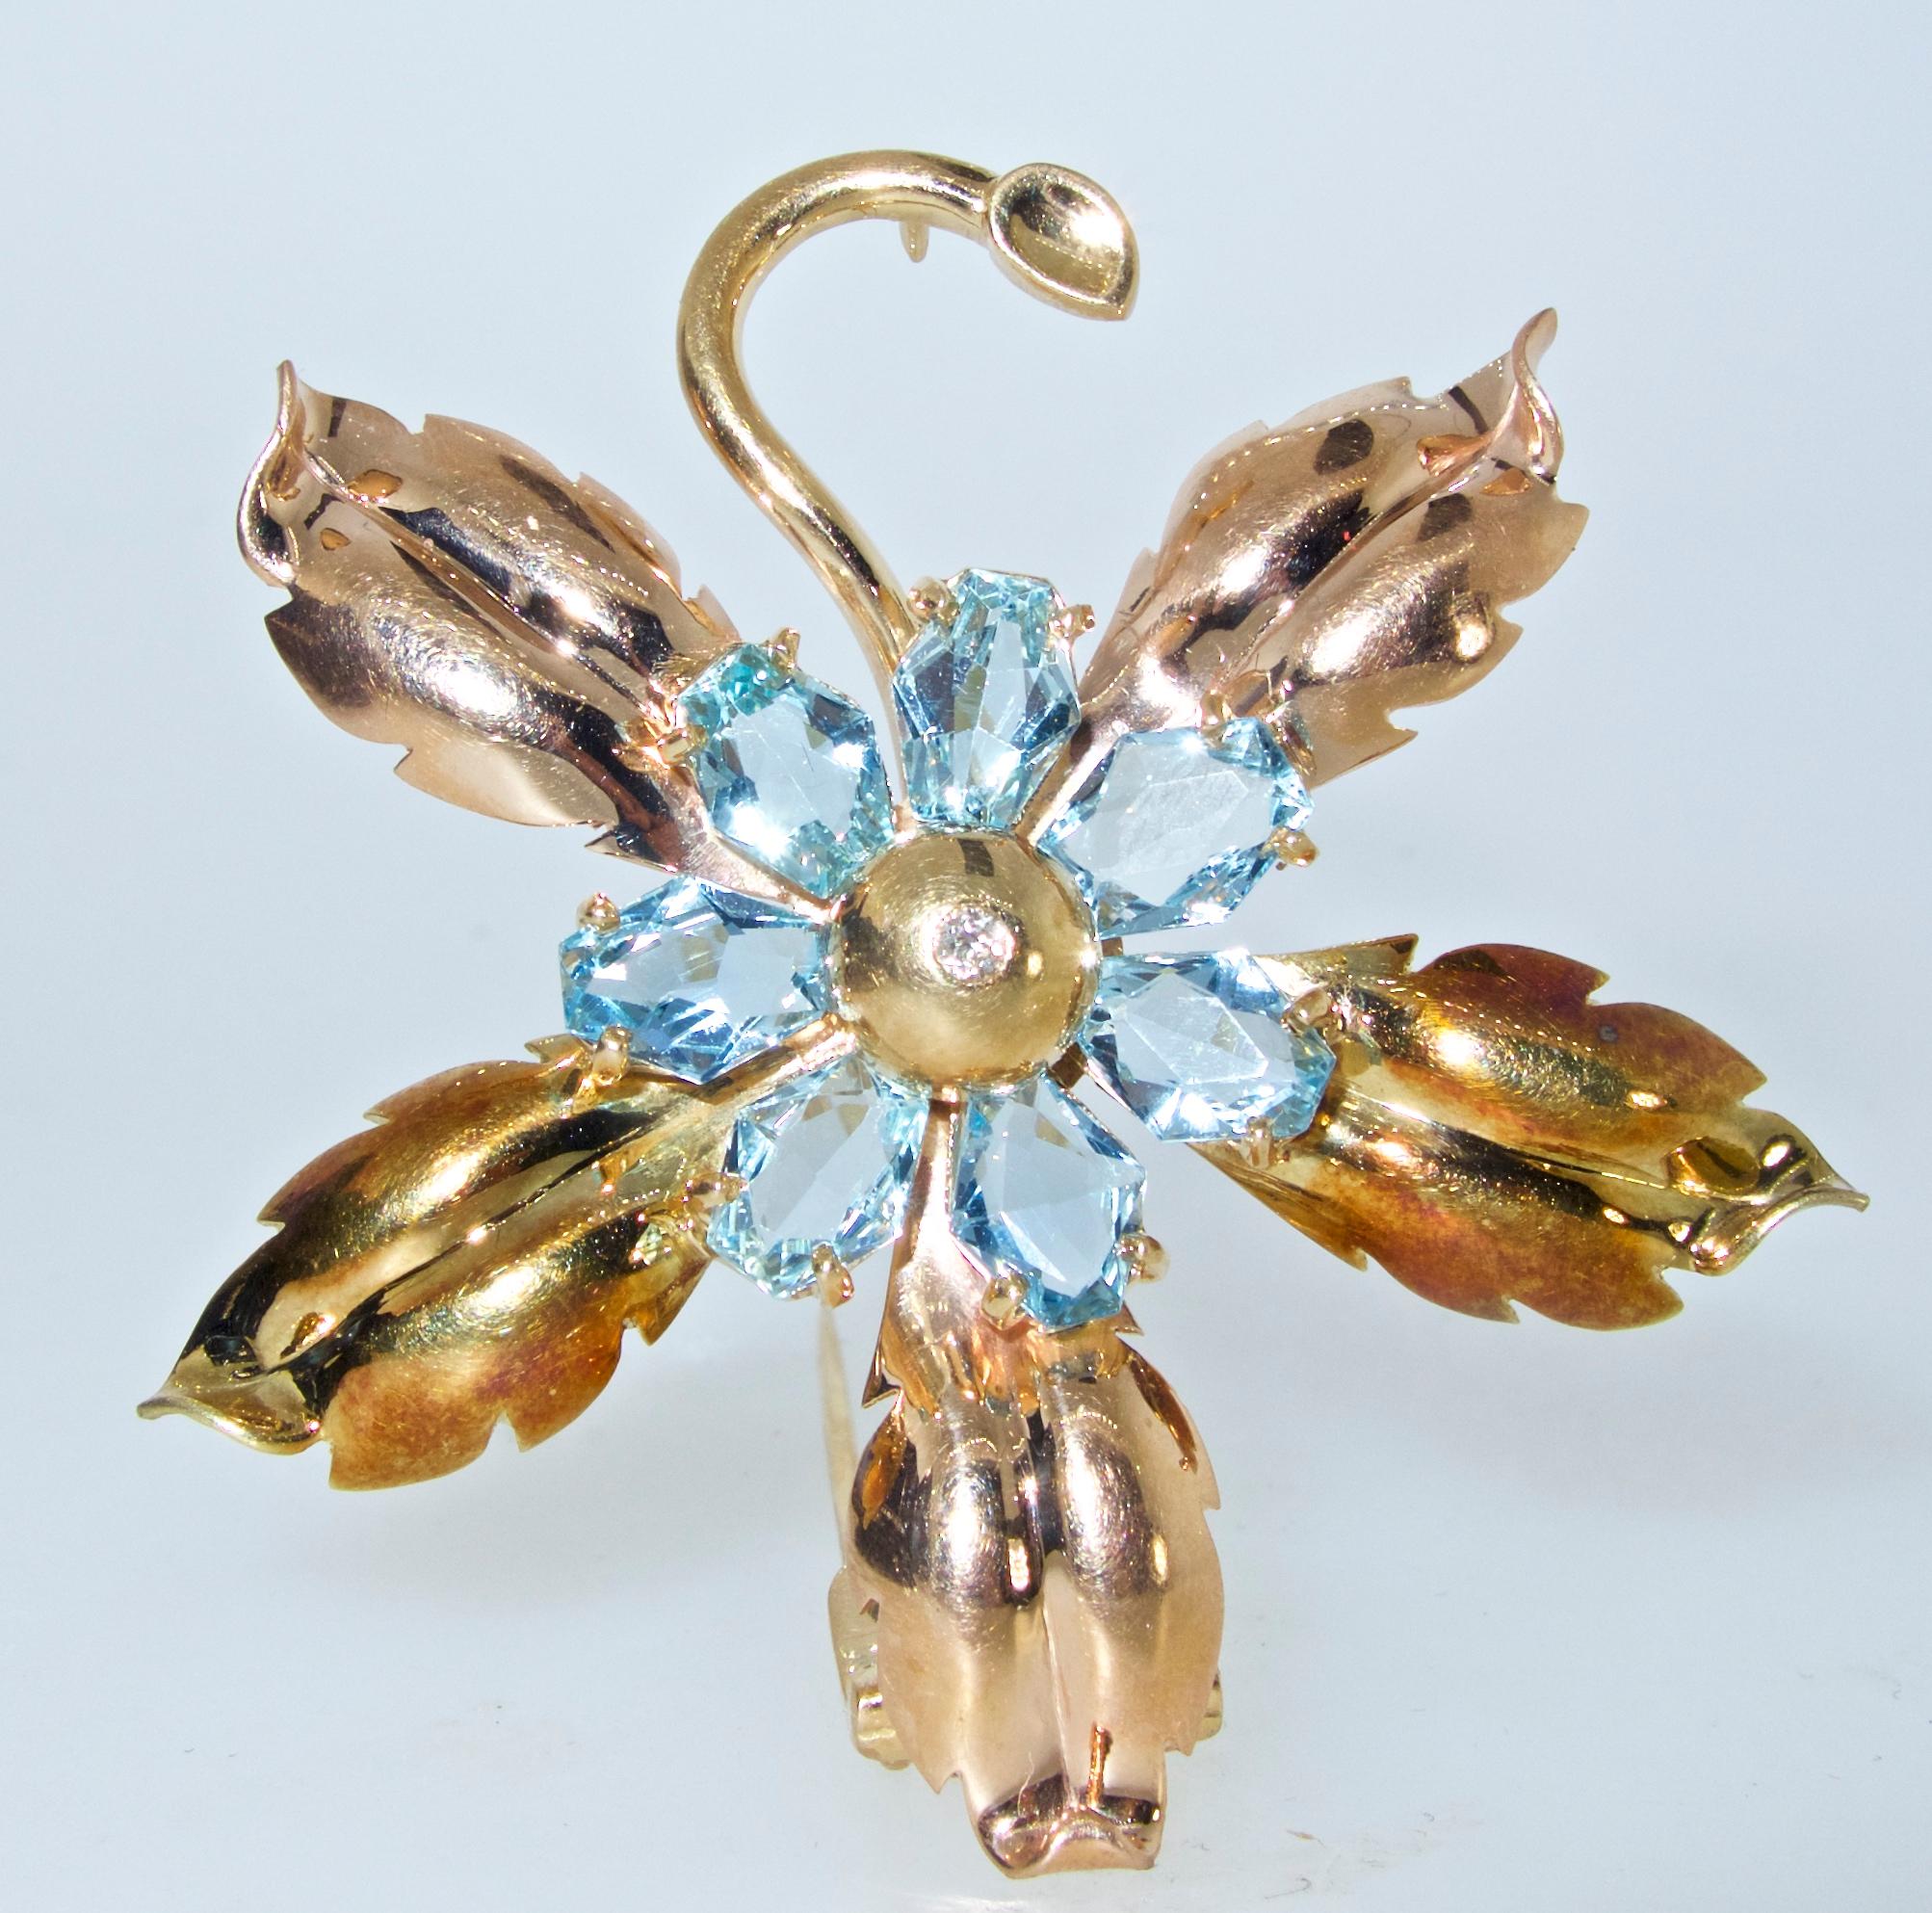 Cartier Retro brooch with 7 fancy cut natural bright blue aquamarines - all bright and well matched.  The total aquamarine weight is approximately 5.6 cts.  The flower bud centers a small white diamond weighing .06 cts.  This double prong brooch